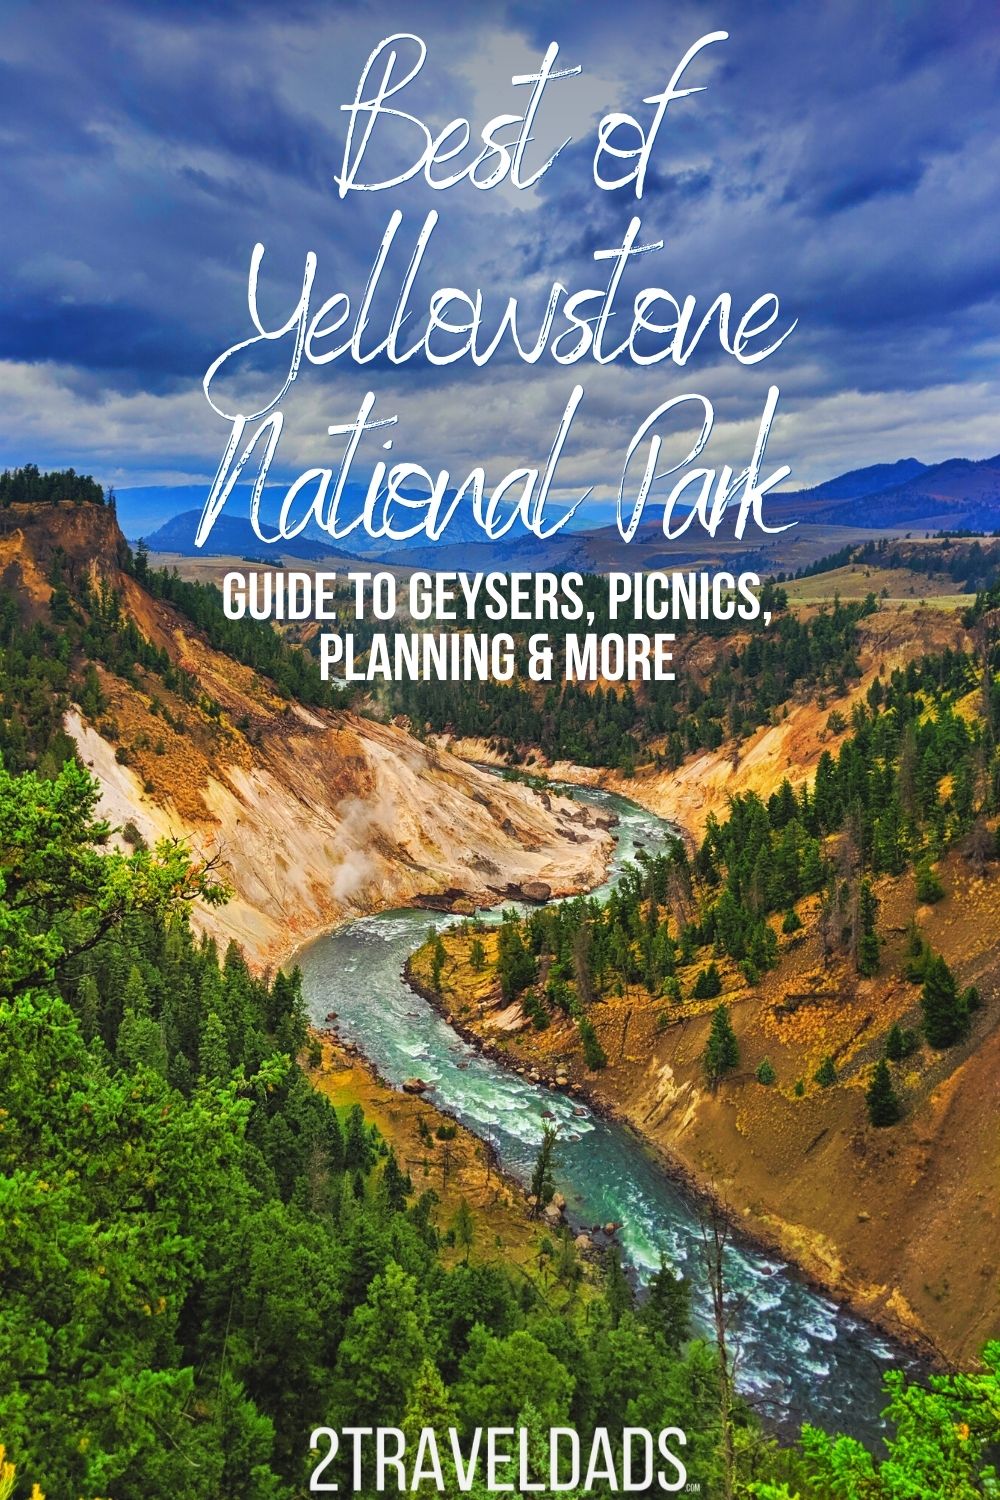 Complete guide to Yellowstone National Park with kids. Travel plans, itineraries, geysers, wildlife and more. Photography tips and being prepared for all weather in Yellowstone, this guide is perfect for family travel.